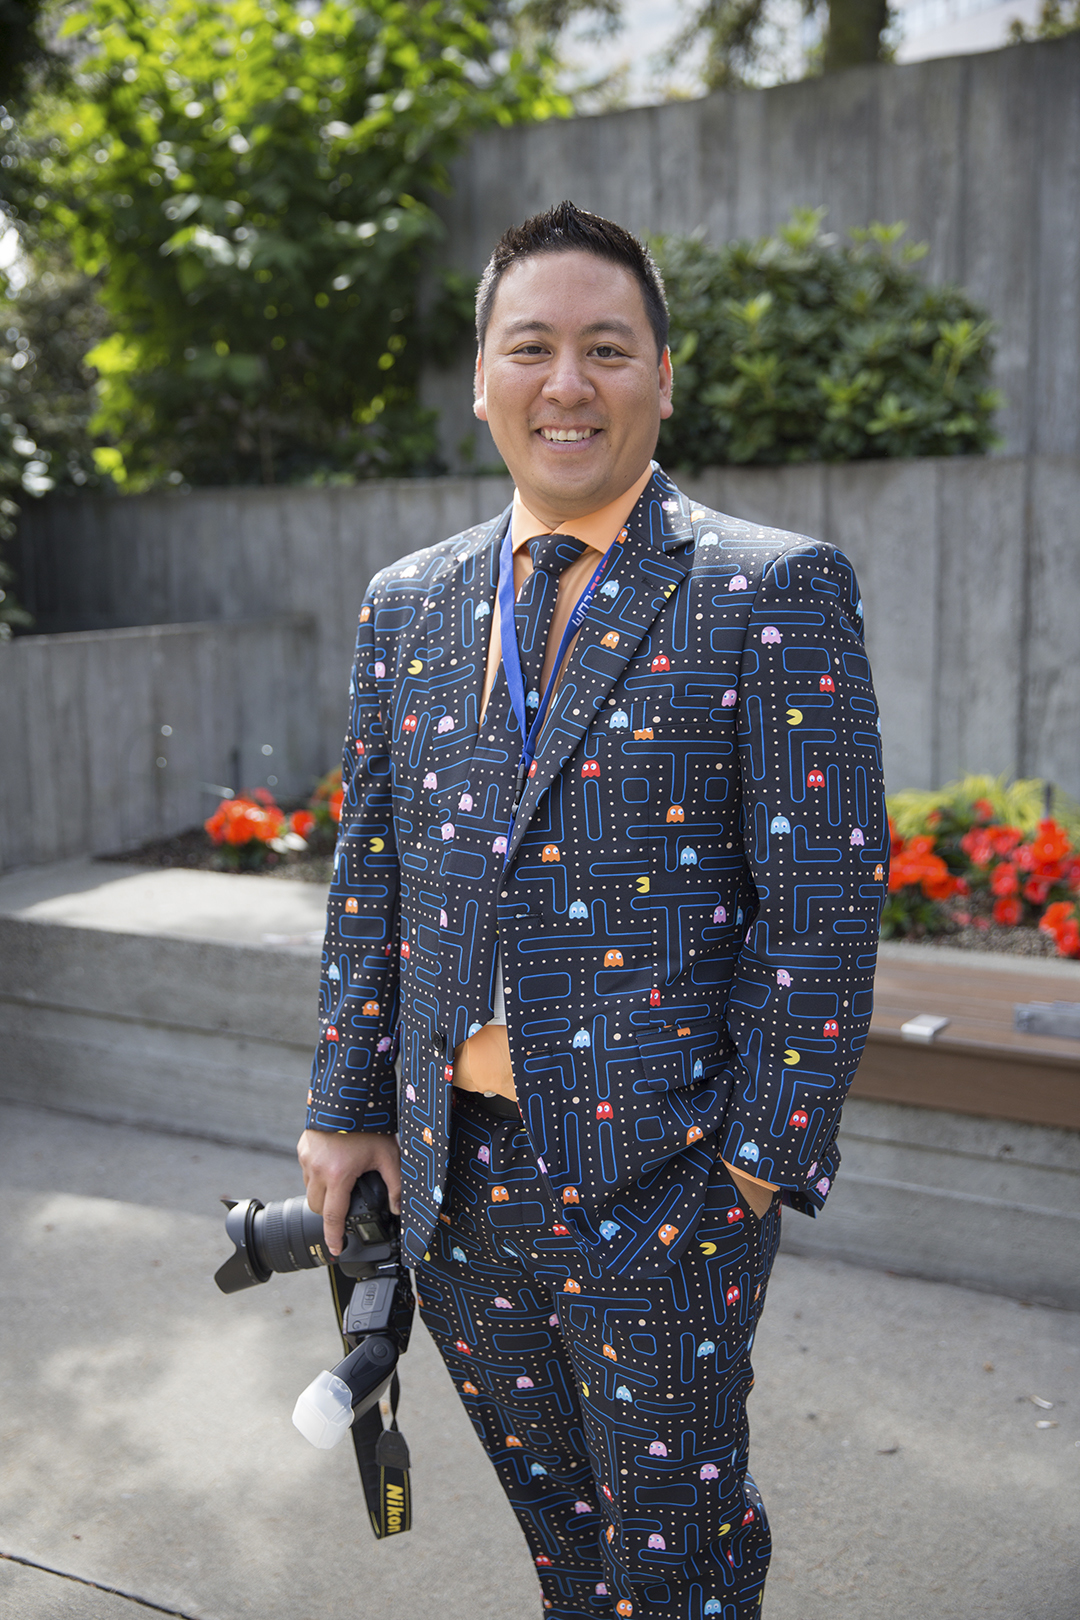 Kazu Arai wears his Pac Man suit while visiting from Vancouver, B.C.